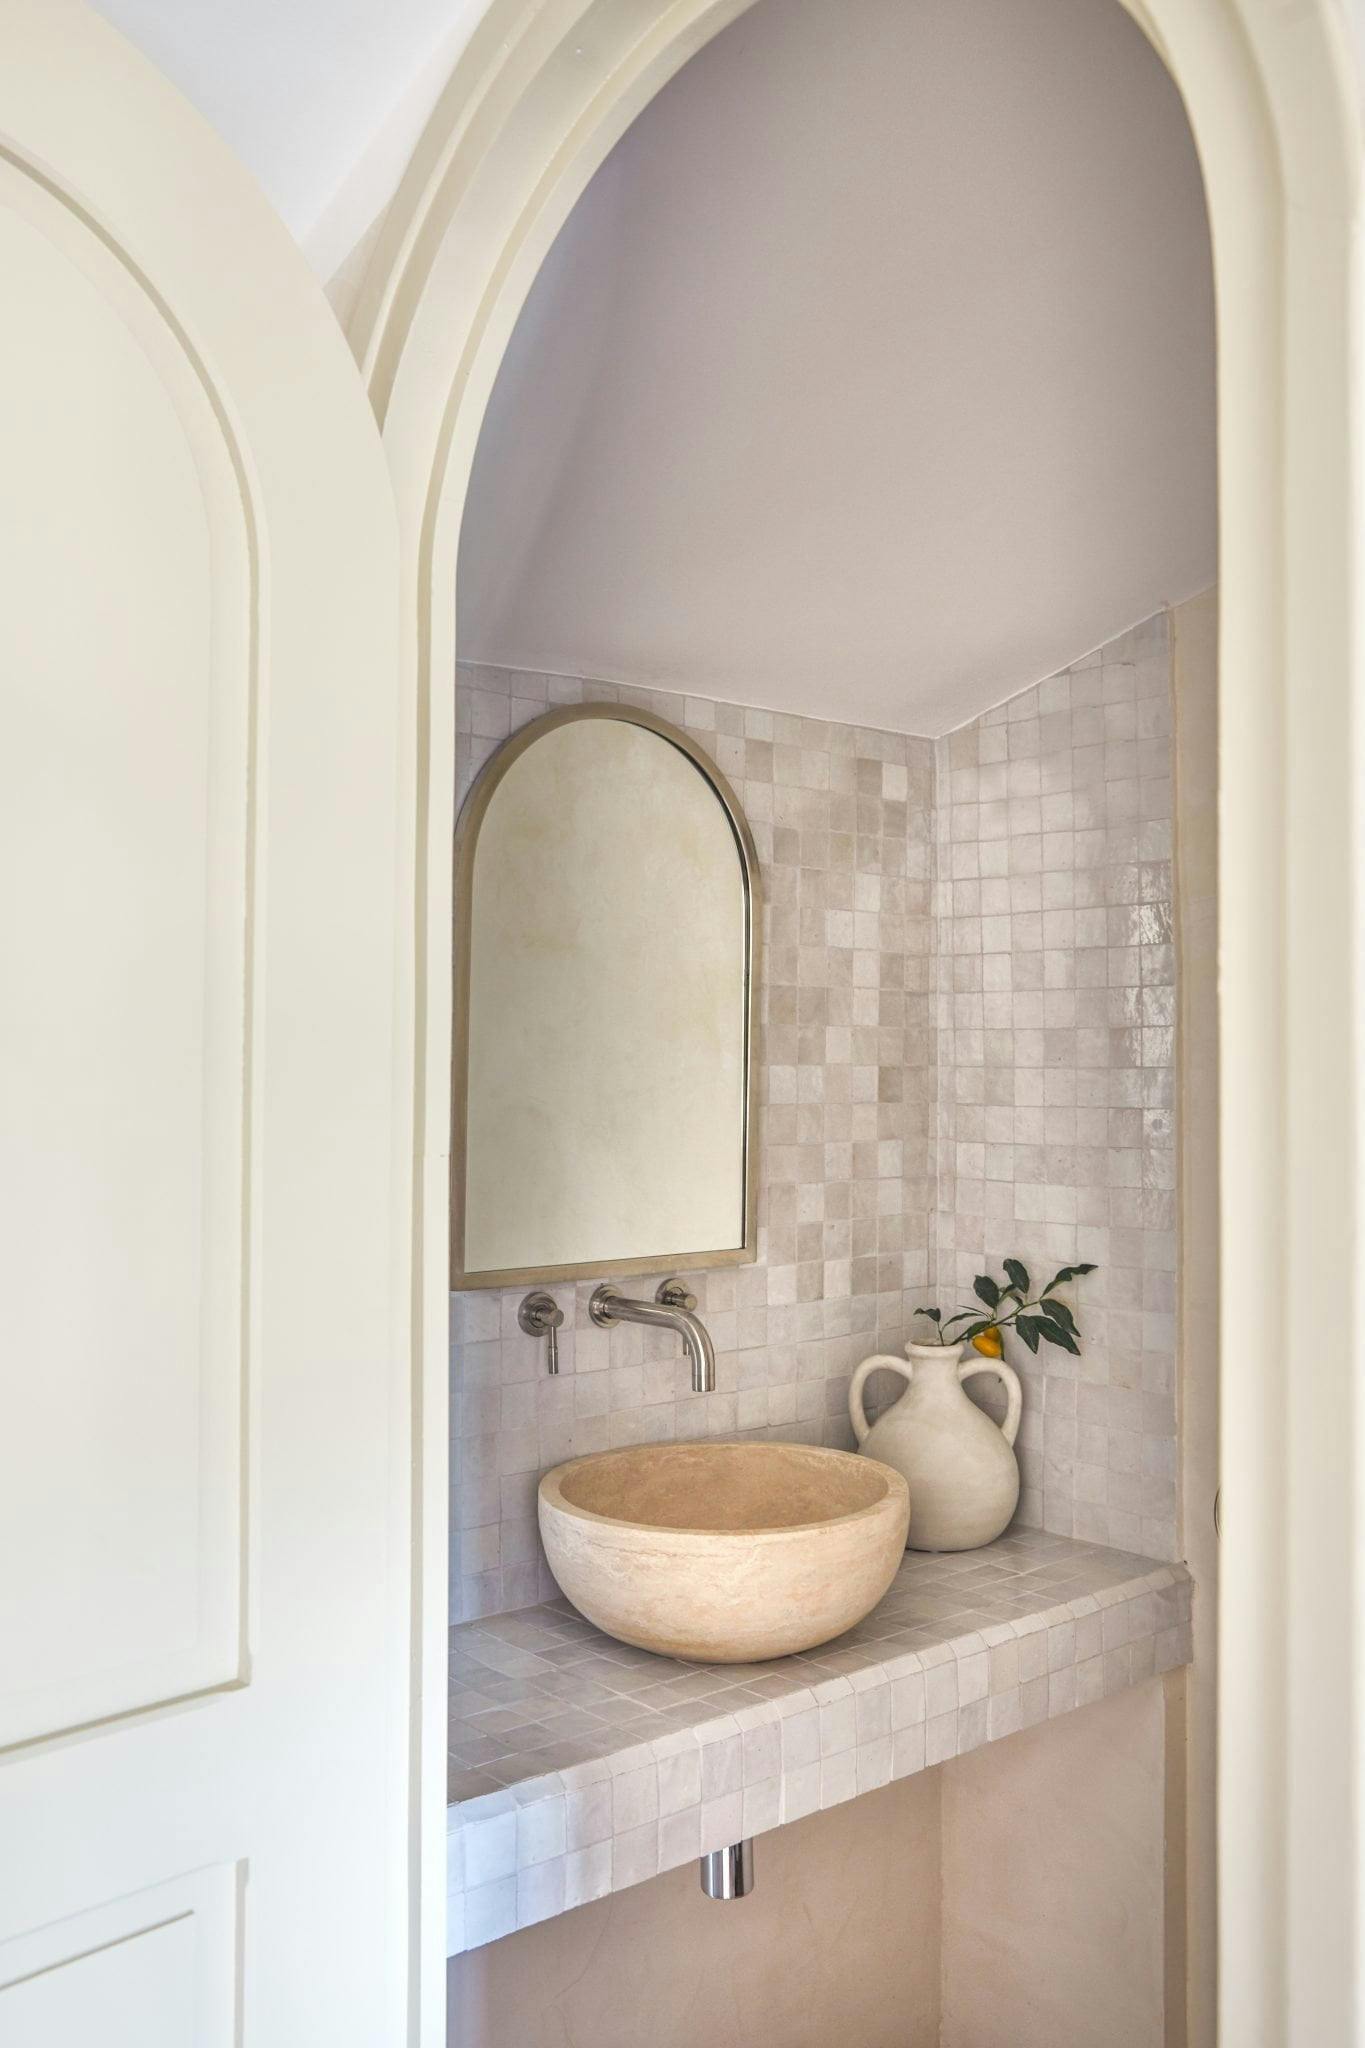 Arch opening onto the bathroom